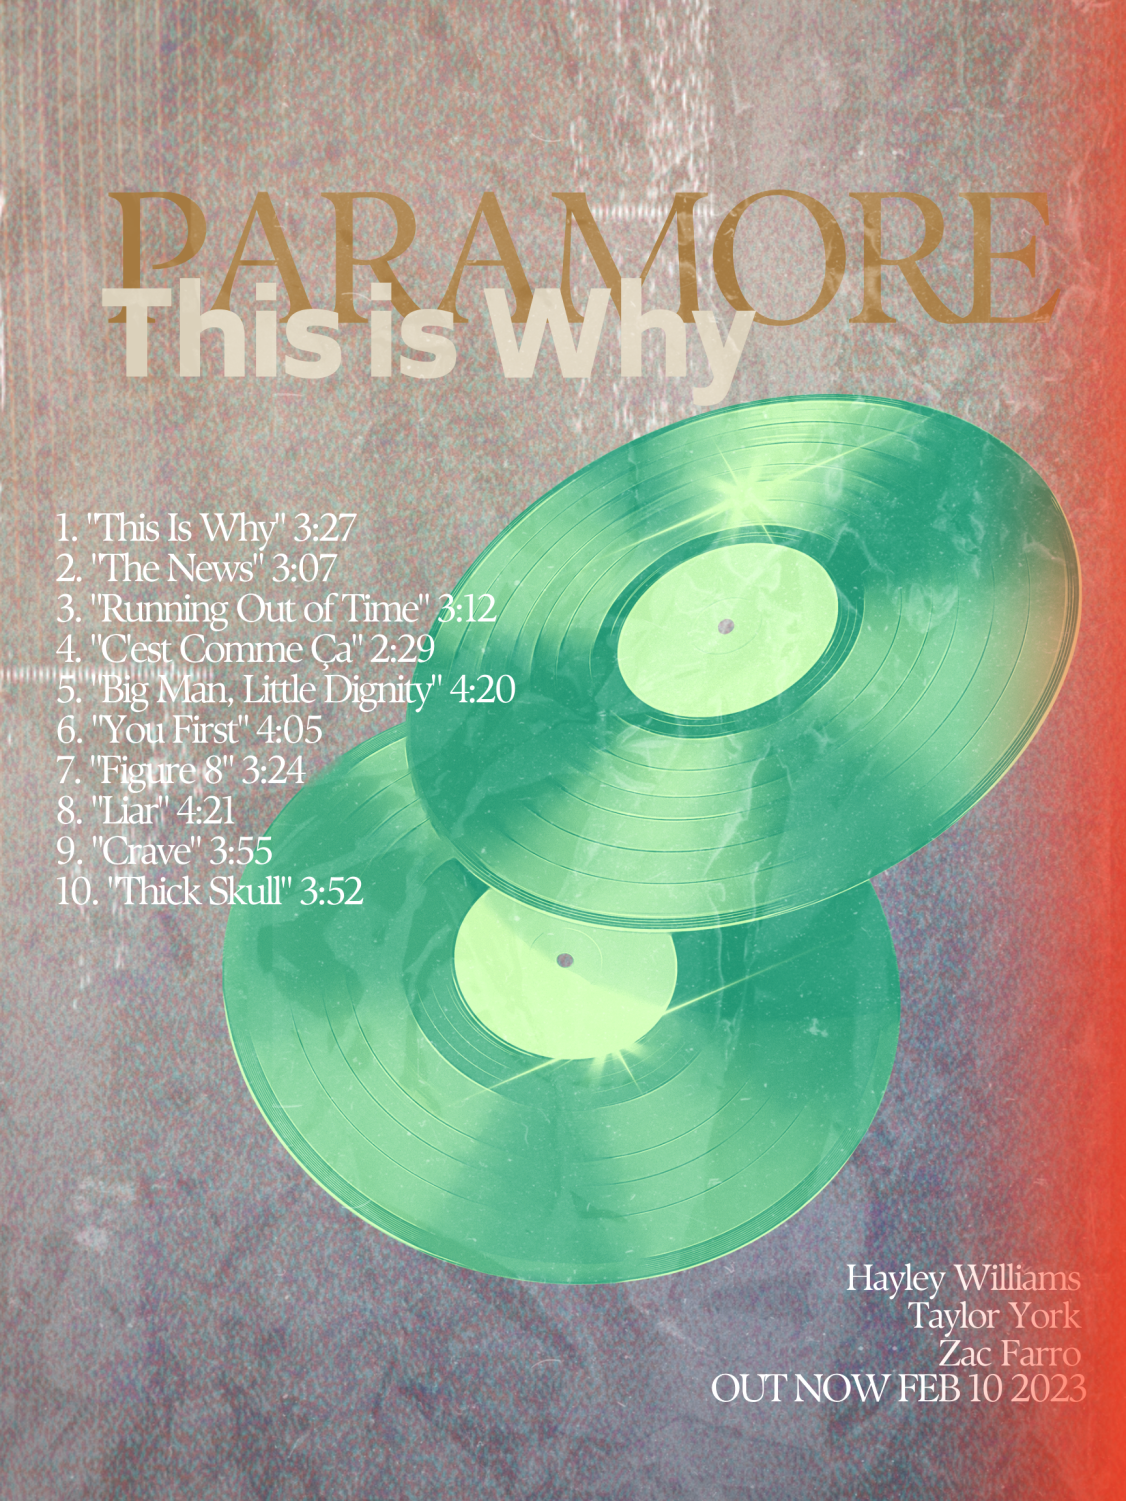 The Return of Paramore – The Oracle